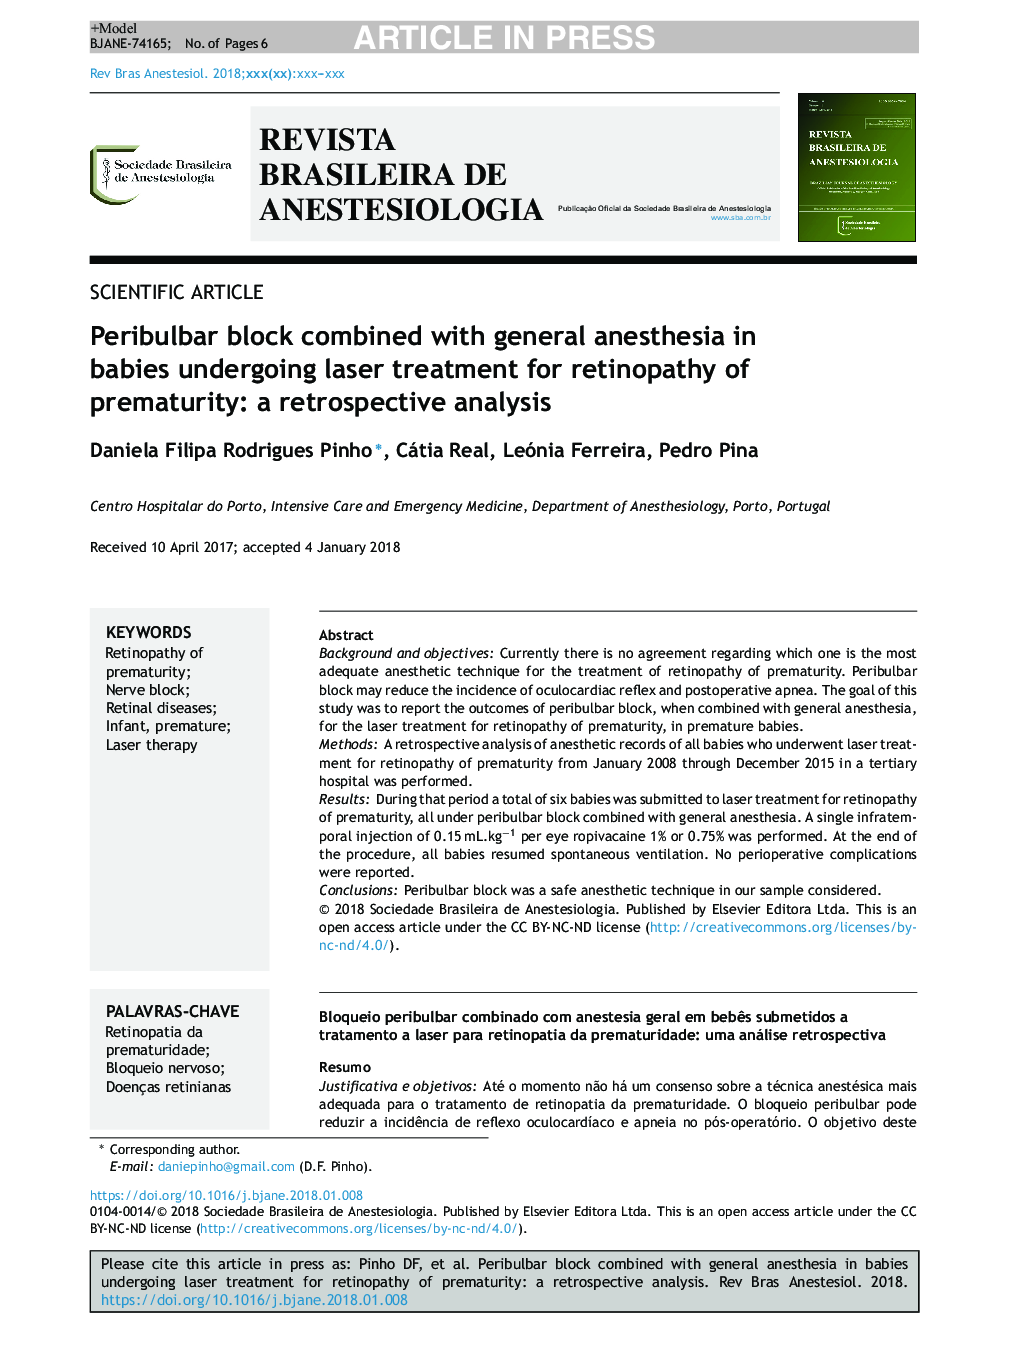 Peribulbar block combined with general anesthesia in babies undergoing laser treatment for retinopathy of prematurity: a retrospective analysis